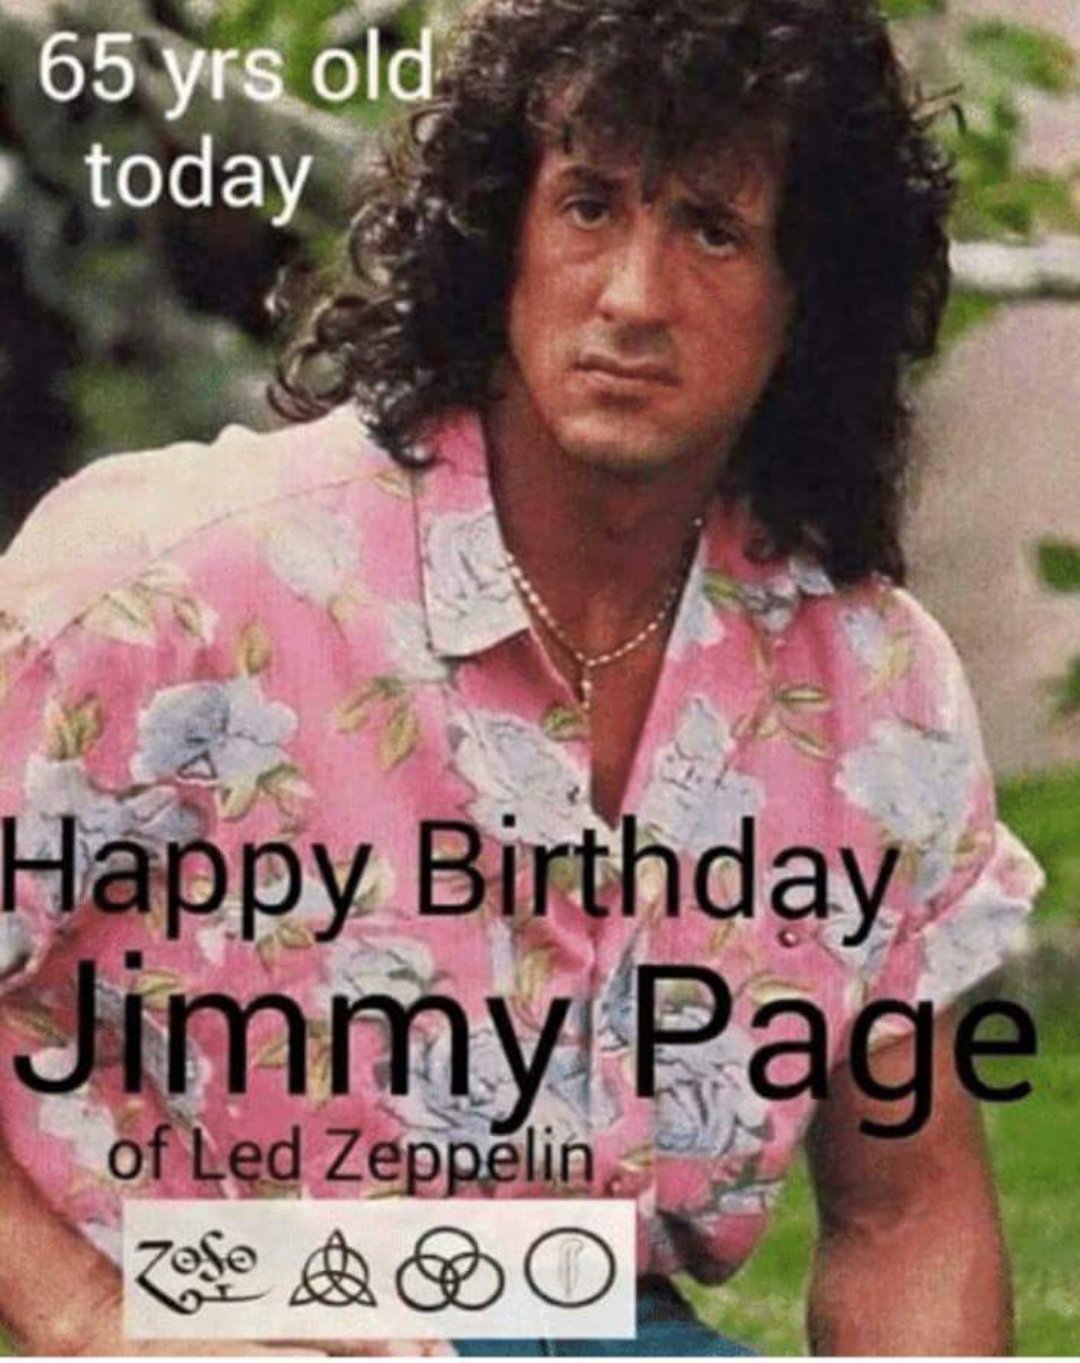 Happy birthday to Led Zeppelin guitarist Jimmy Page! 